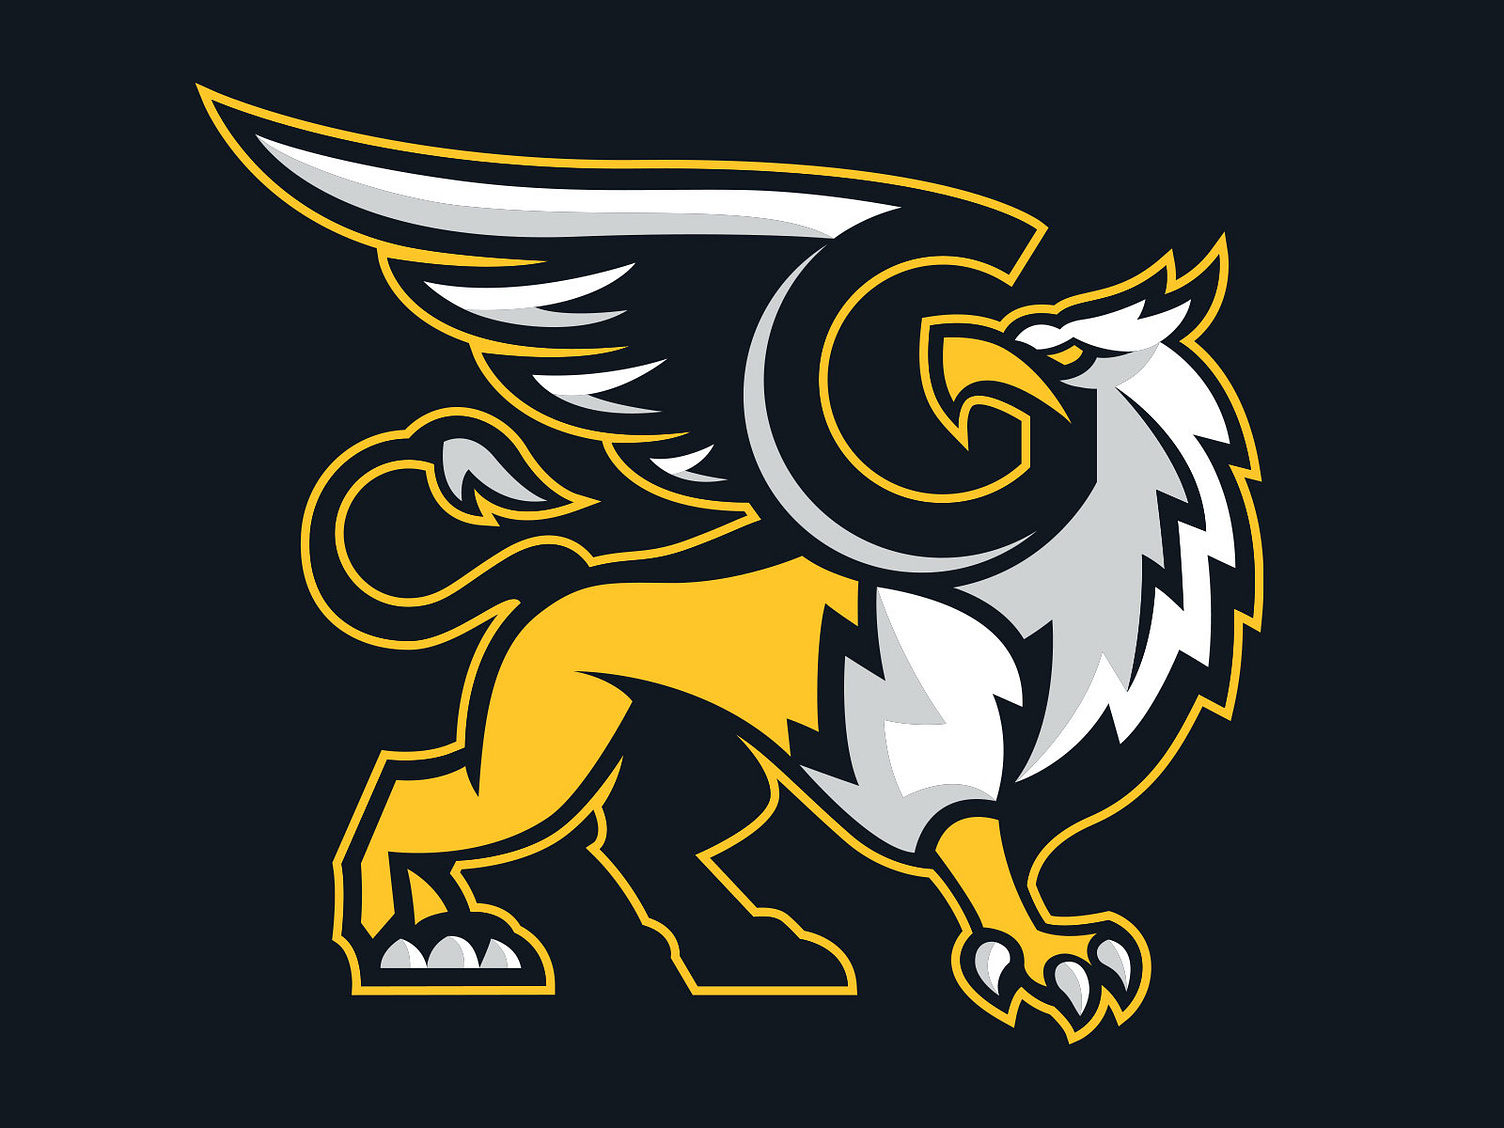 Gretna East High Griffins Logo by ChangeTheThought on Dribbble